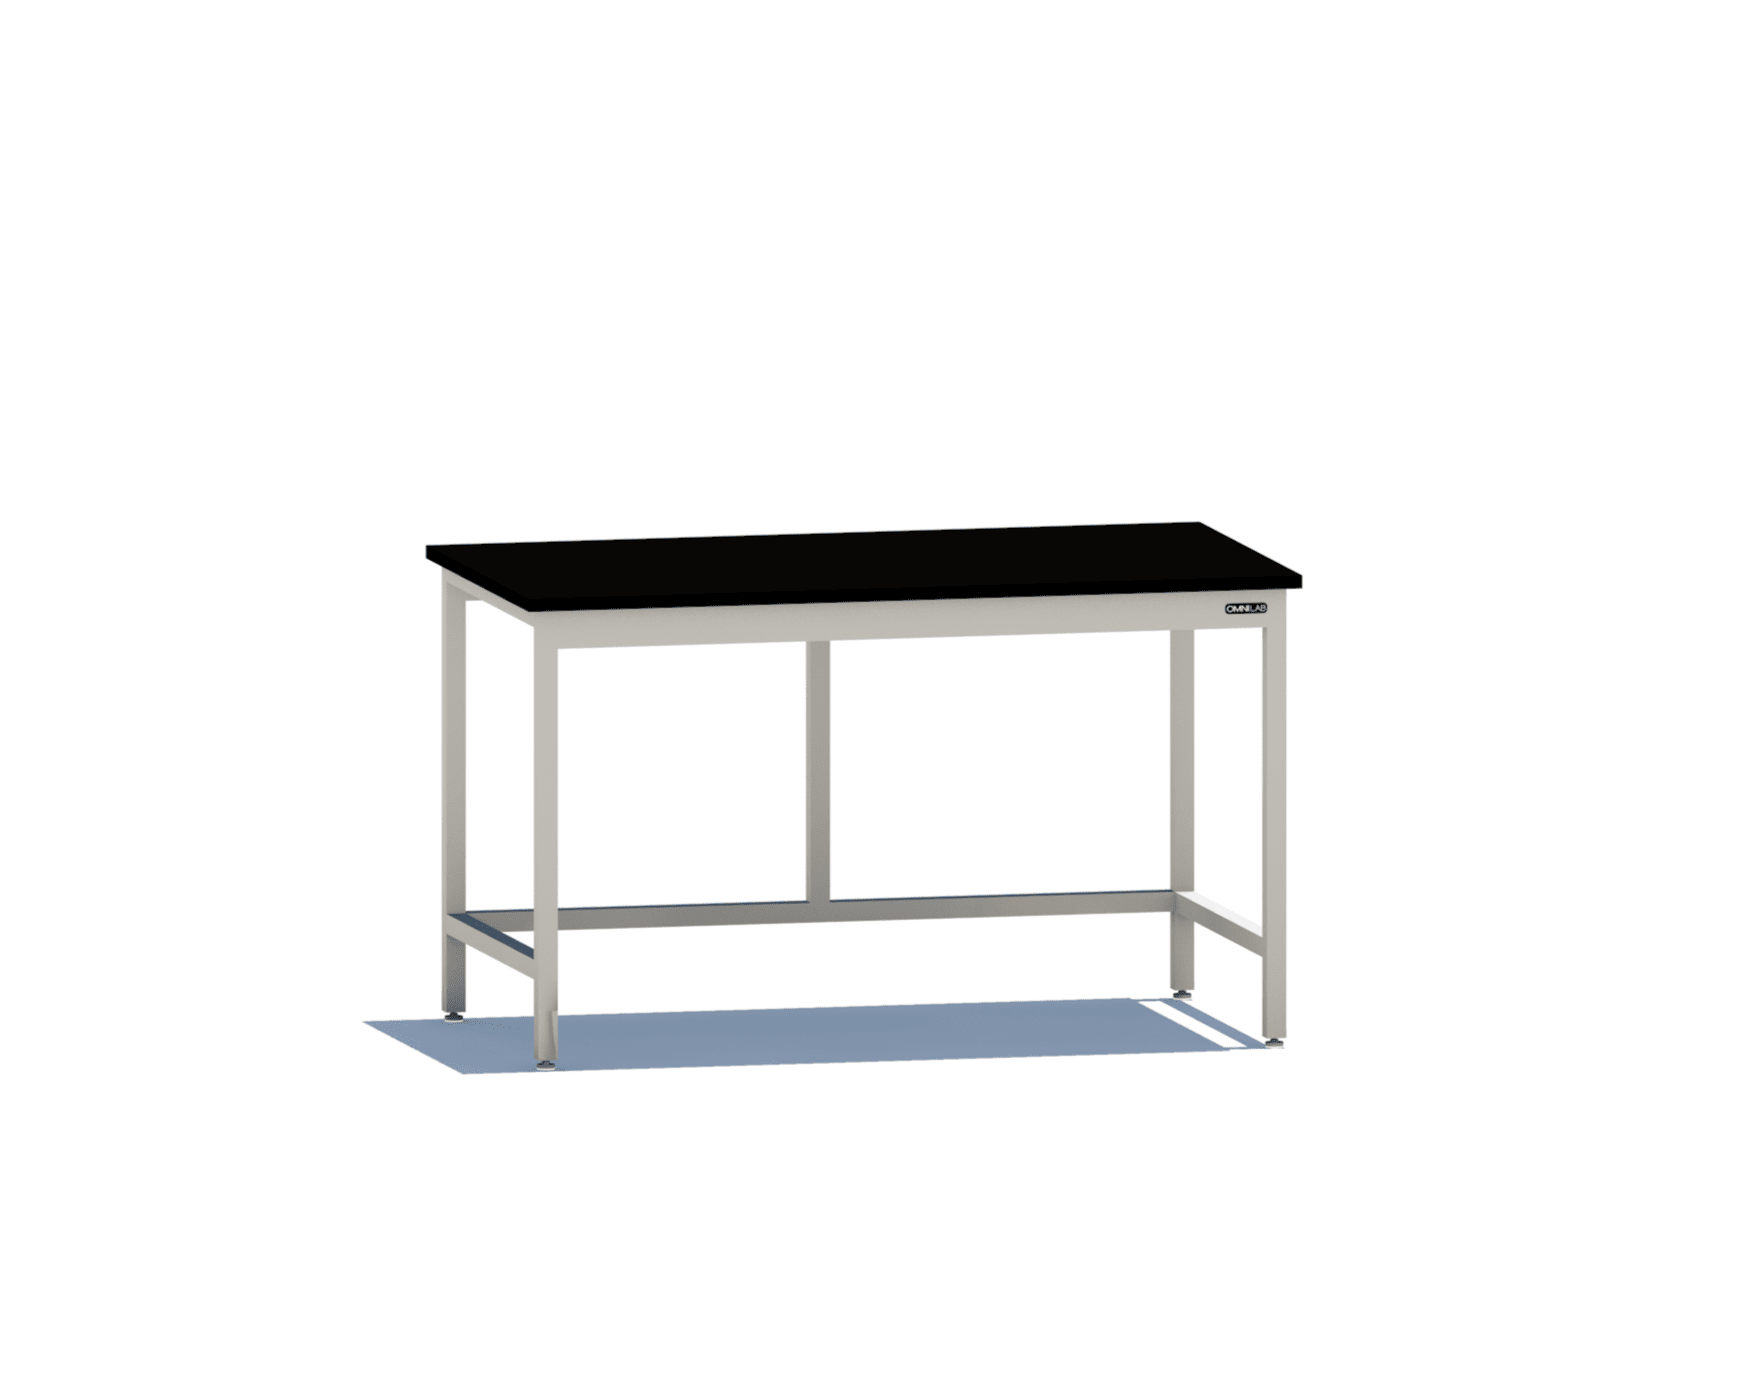 Essential Table 1 Lab Tables OMNI Lab Solutions 60" wide 